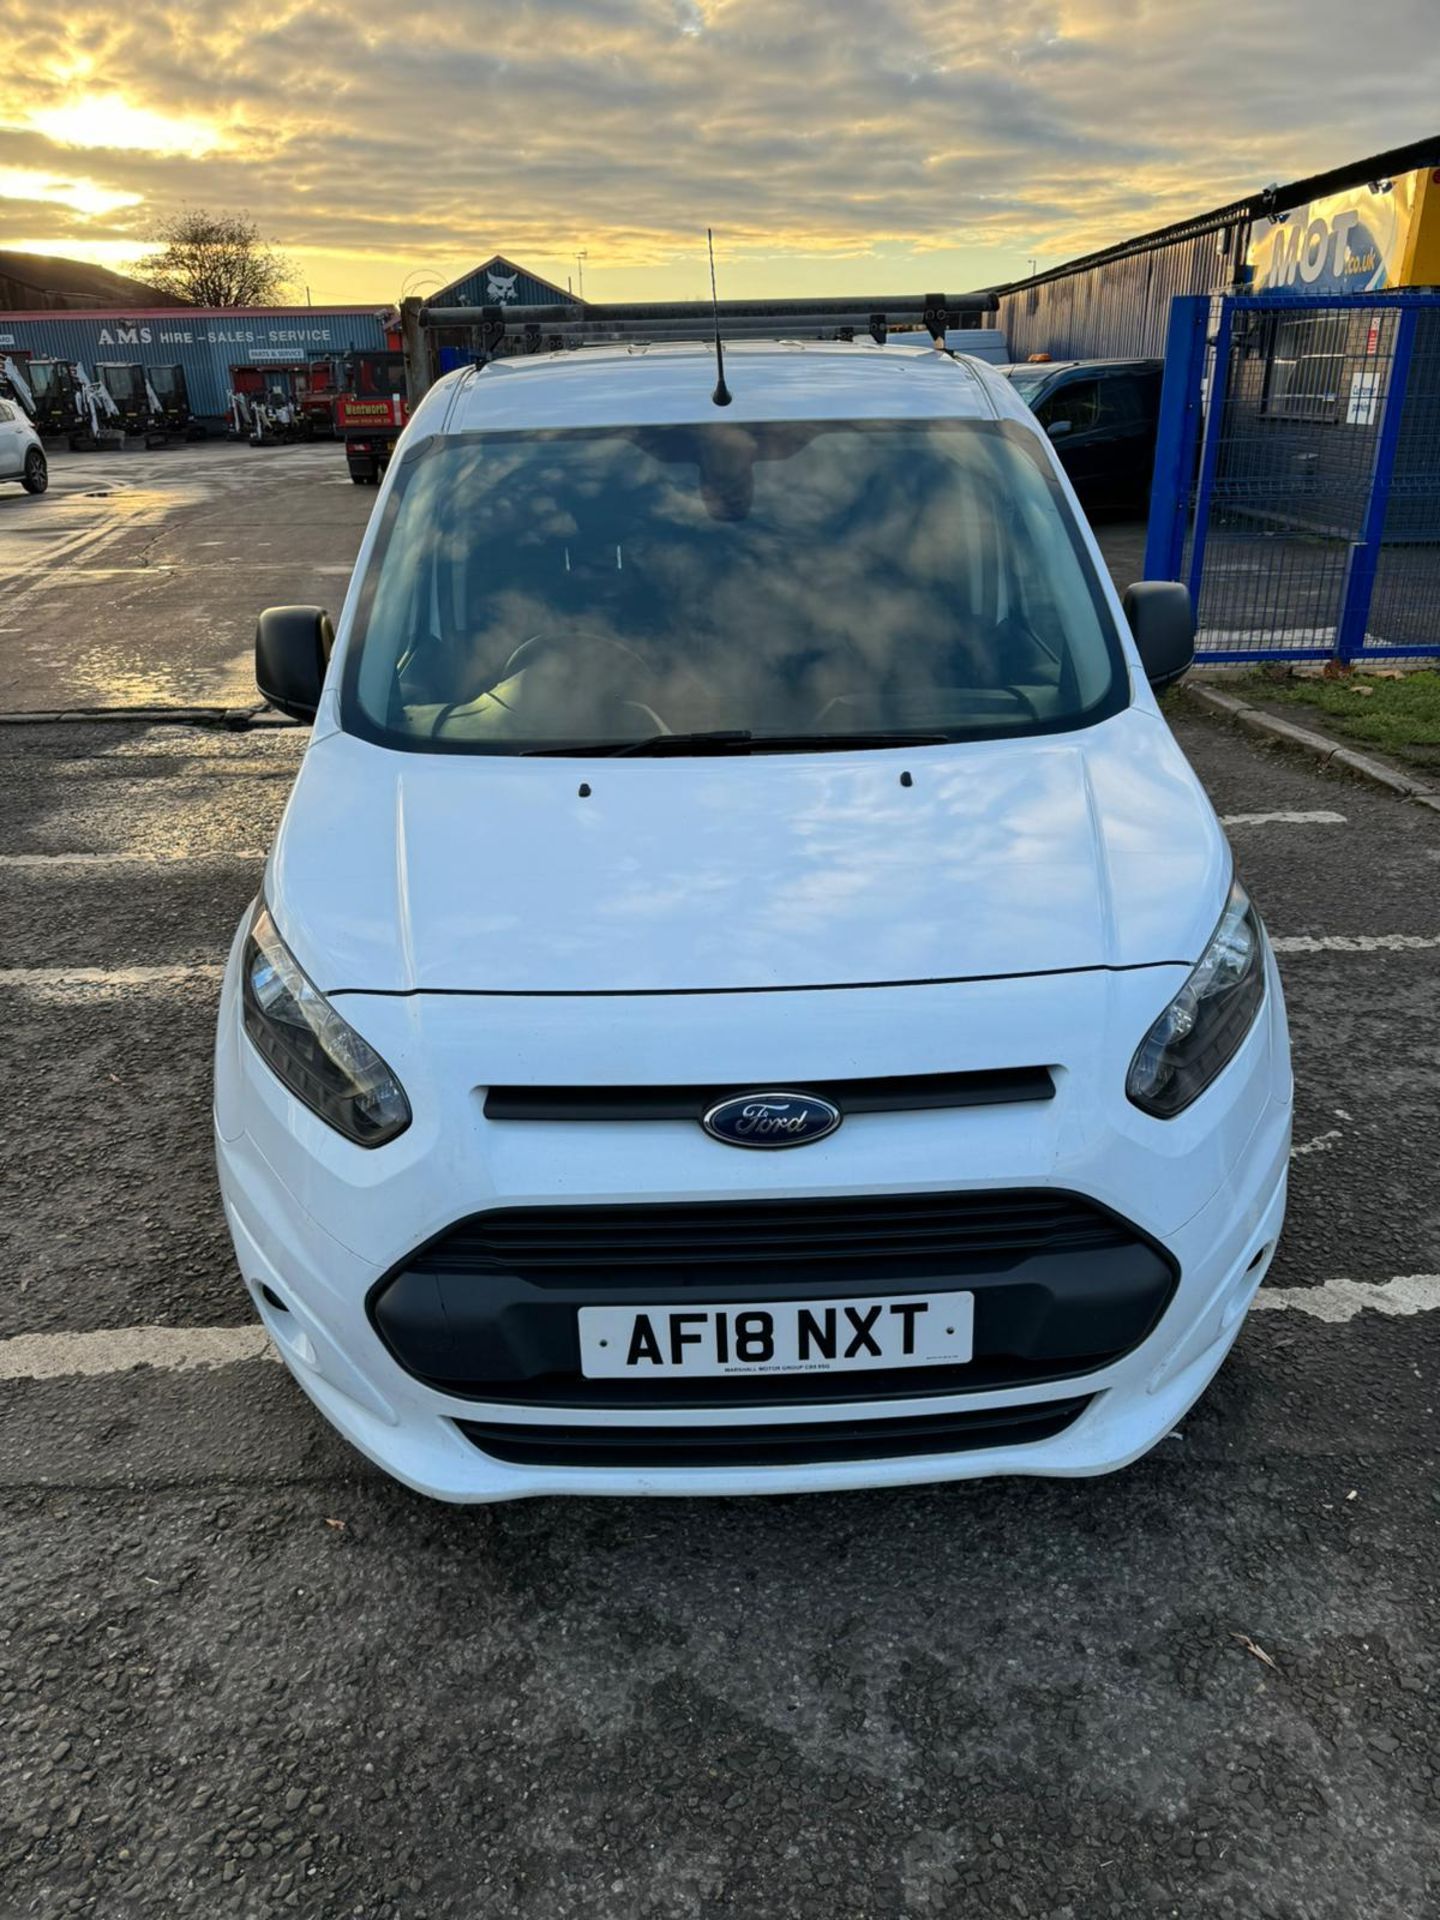 2018 18 FORD TRANSIT CONNECT TREND PAENL VAN - 128K MILES - EURO 6 - 3 SEATS - LWB - ROOF RACK. - Image 7 of 11